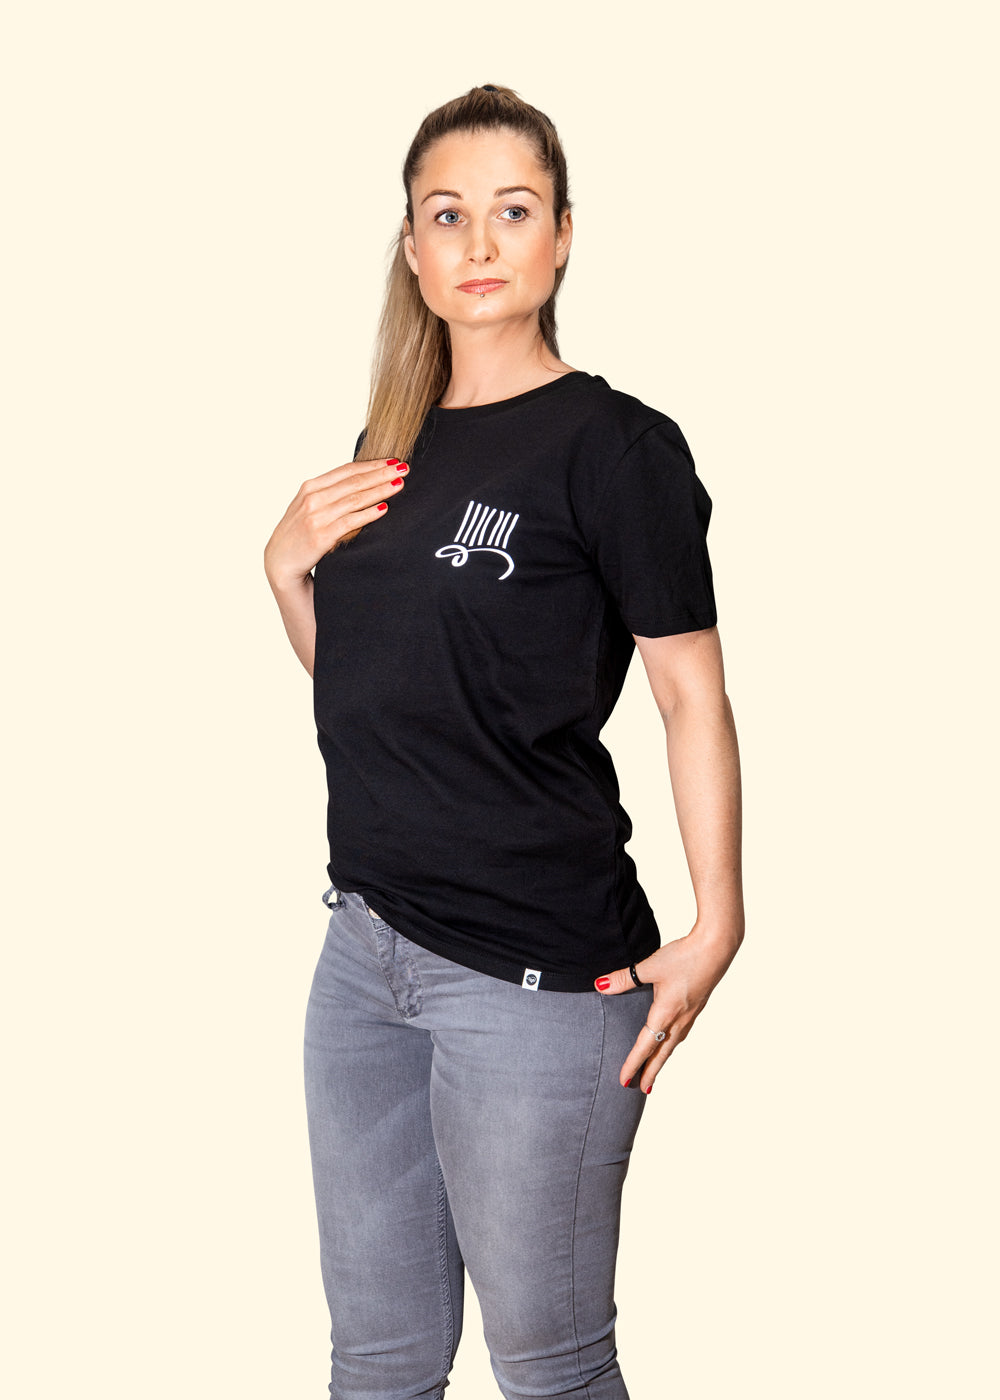 prison-bars-logo-tee-oldpassion-apparel-co.-from-prison-with-love-schwarz-vorderseite